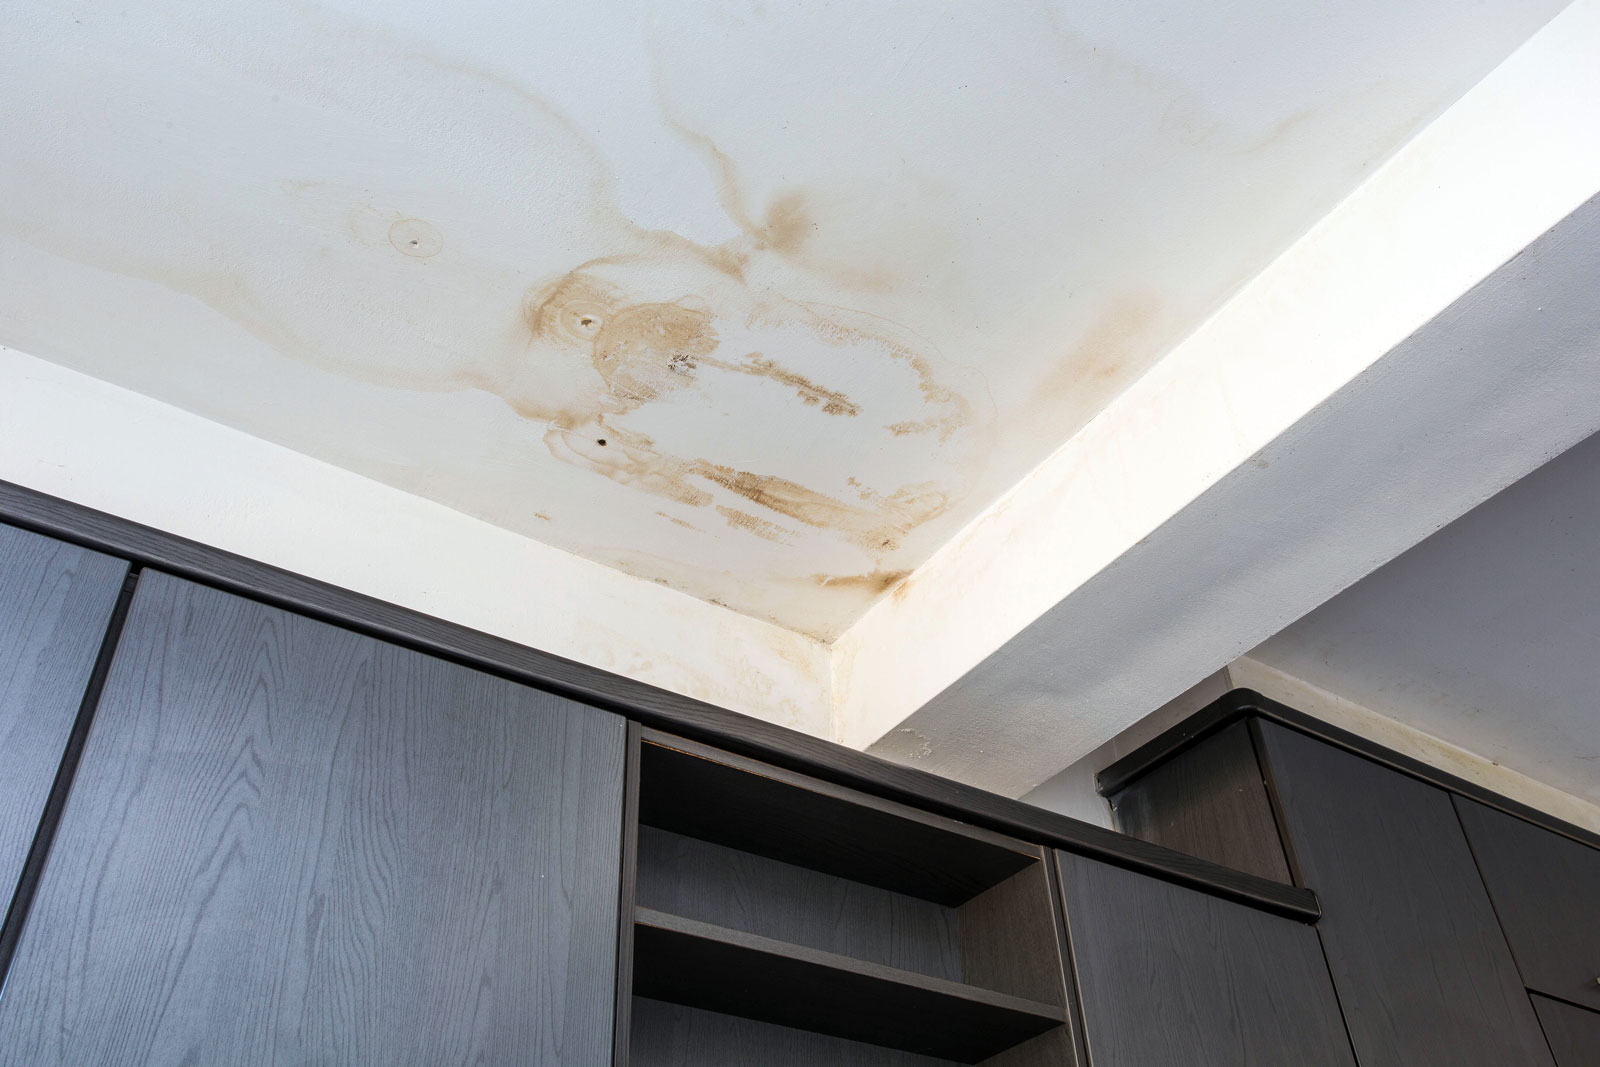 Water Damage from Leaking Roof, Signs & Solutions